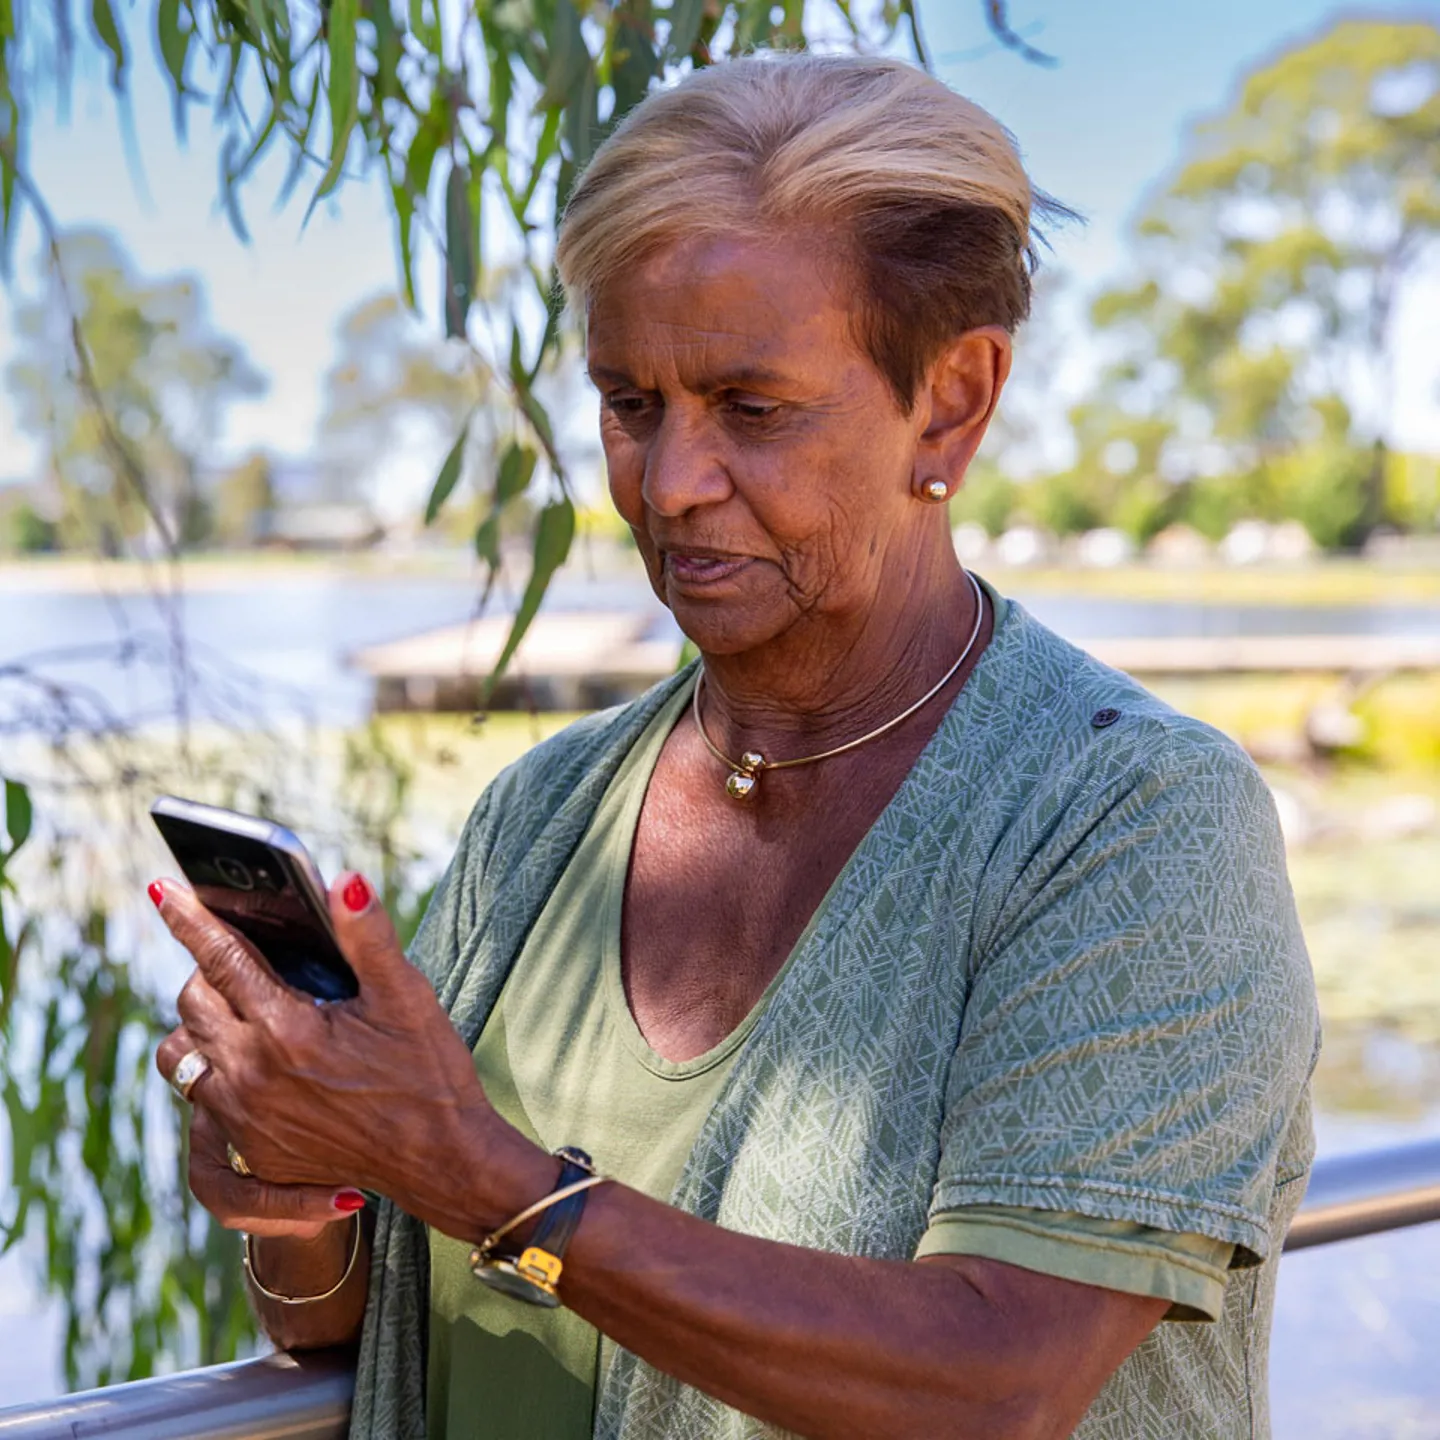 Woman standing next to a pond looking at her phone